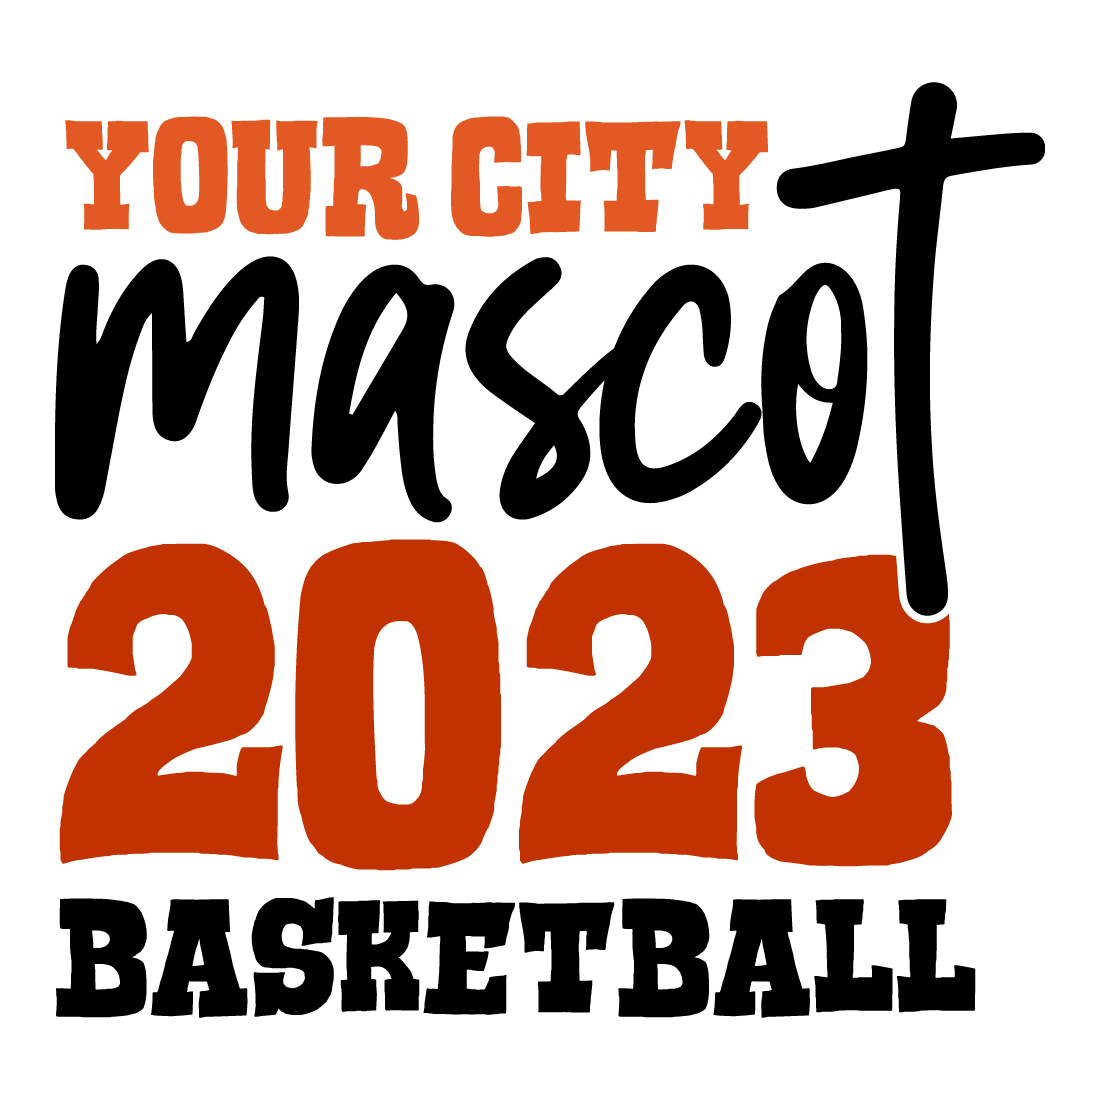 Your City Mascot 2023 Basketball cover image.